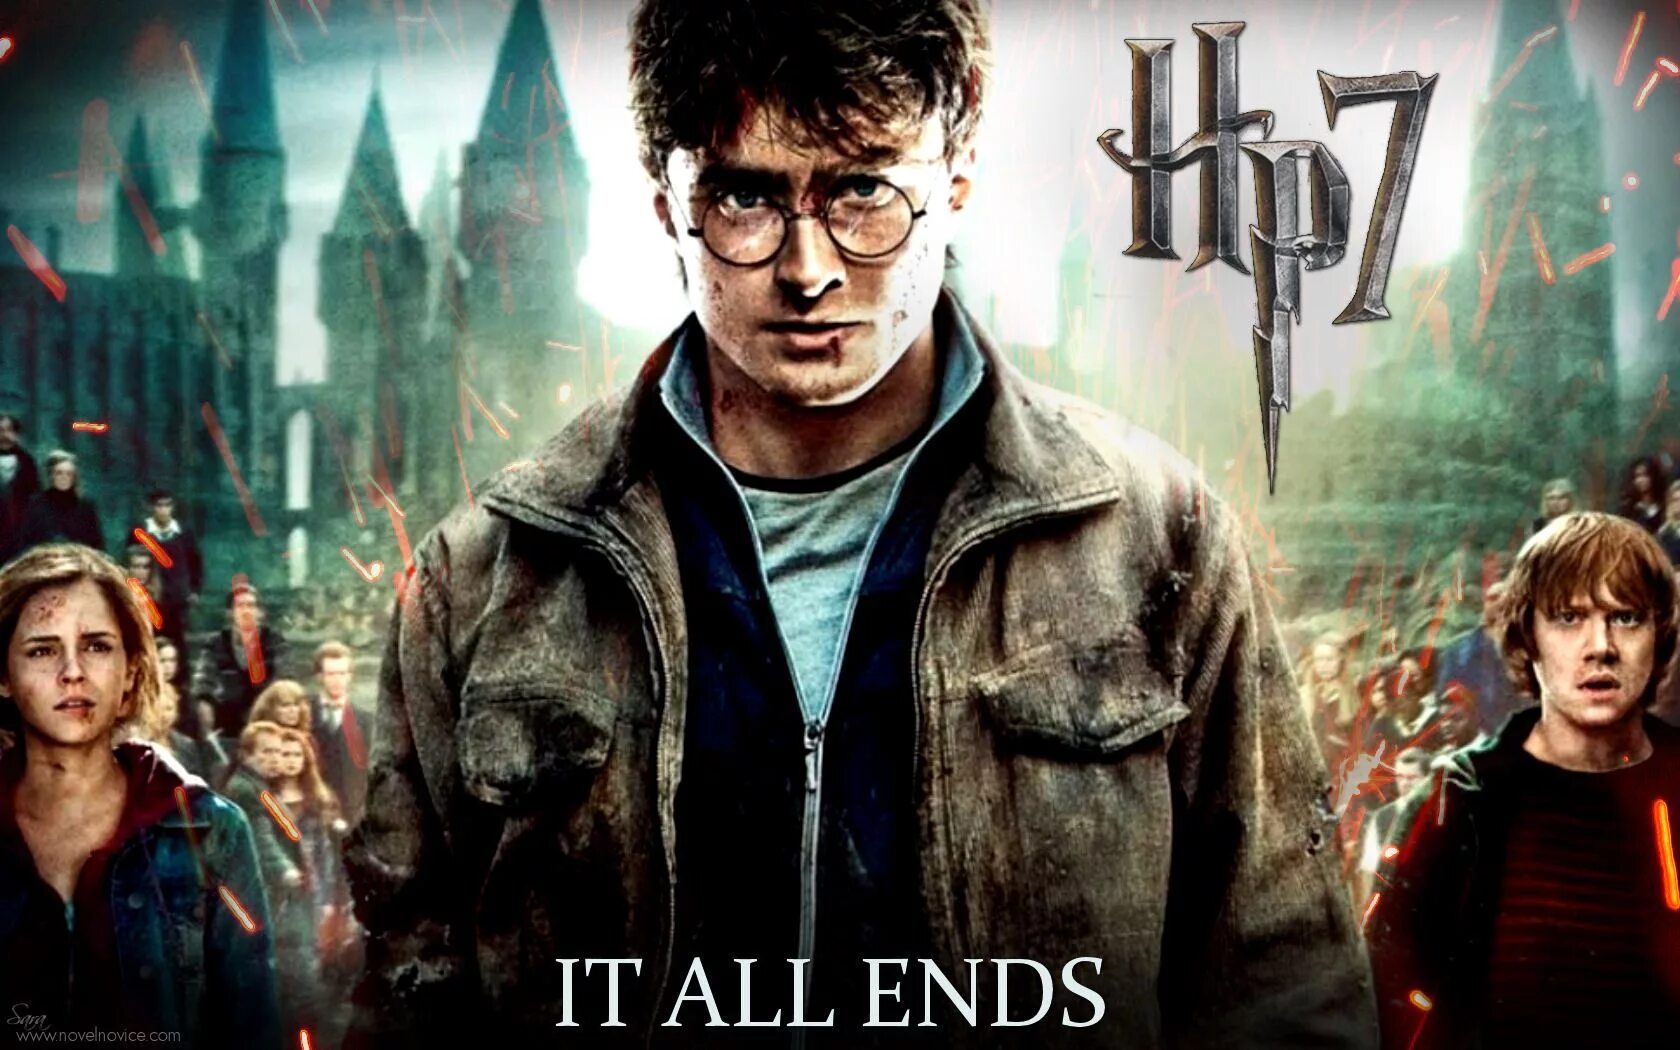 Harry Potter and the Deathly Hallows картинки. Аудиокниги дары смерти 1